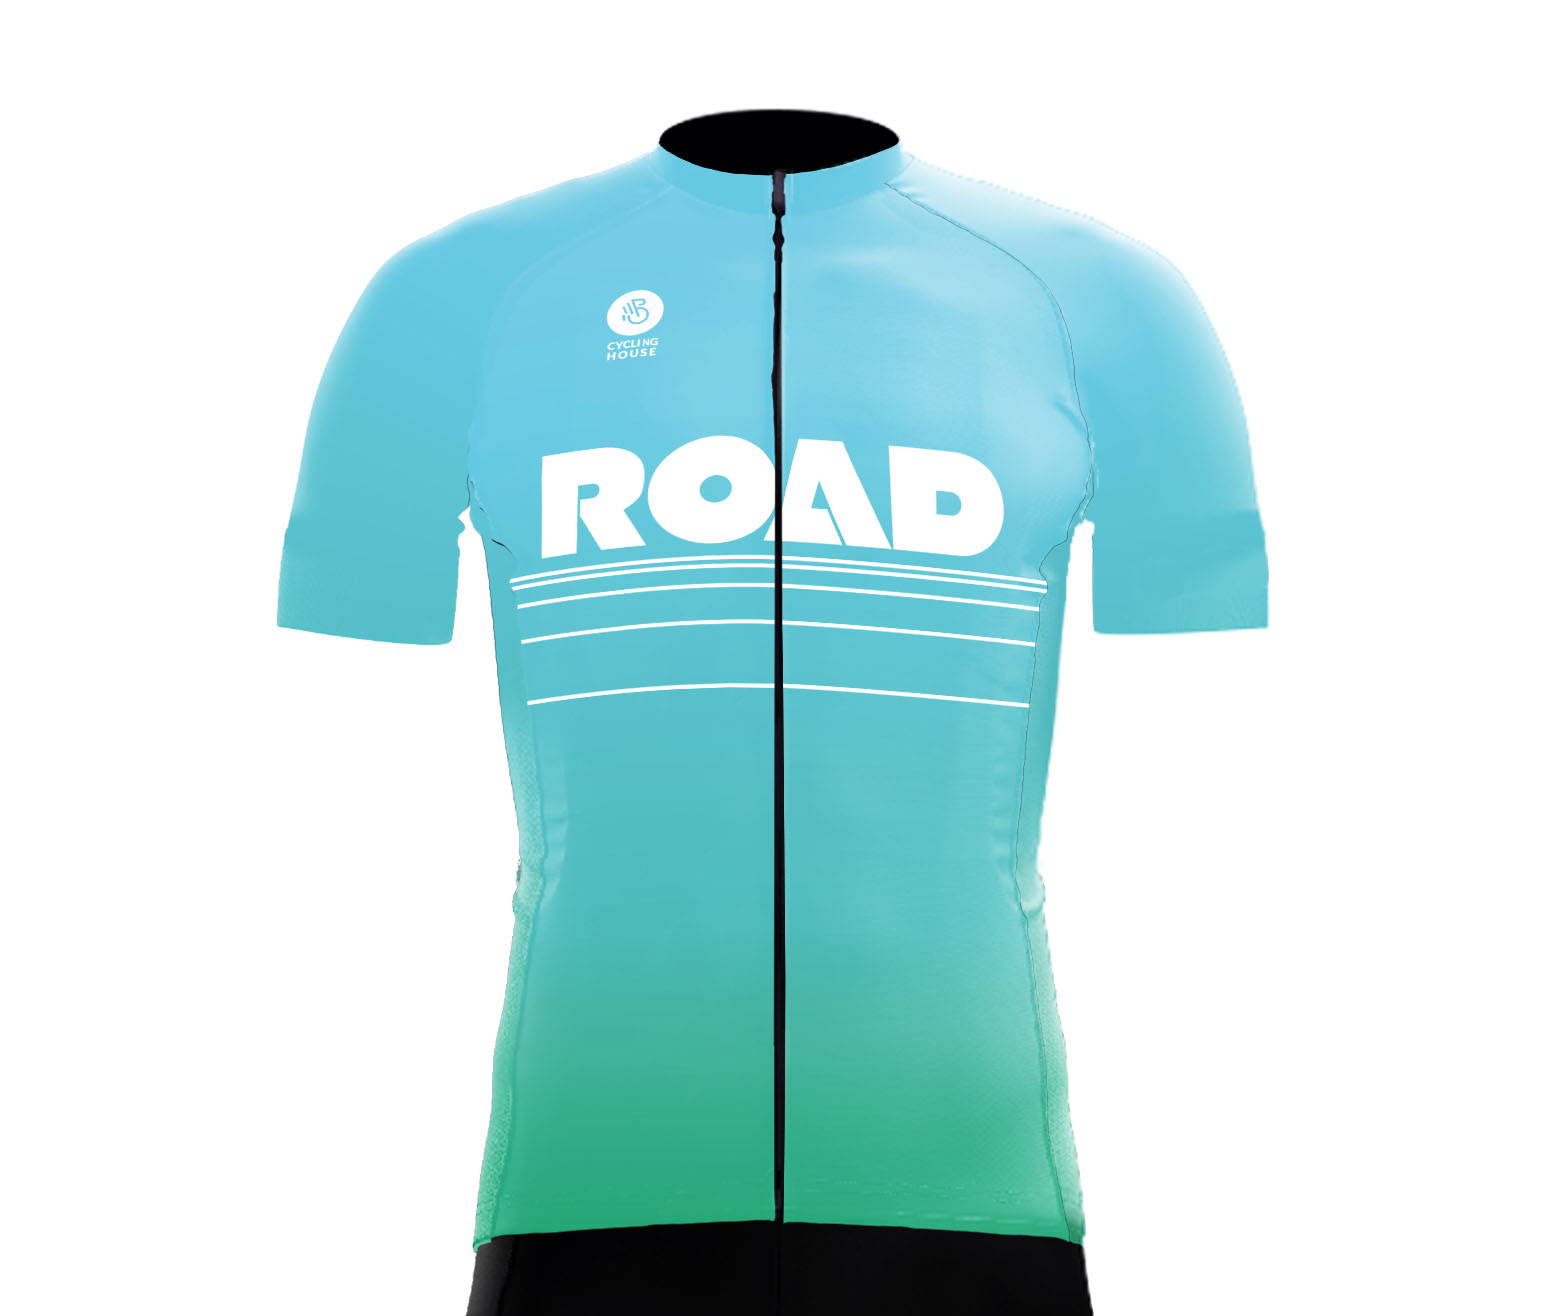 Cycling jersey ROAD image 1